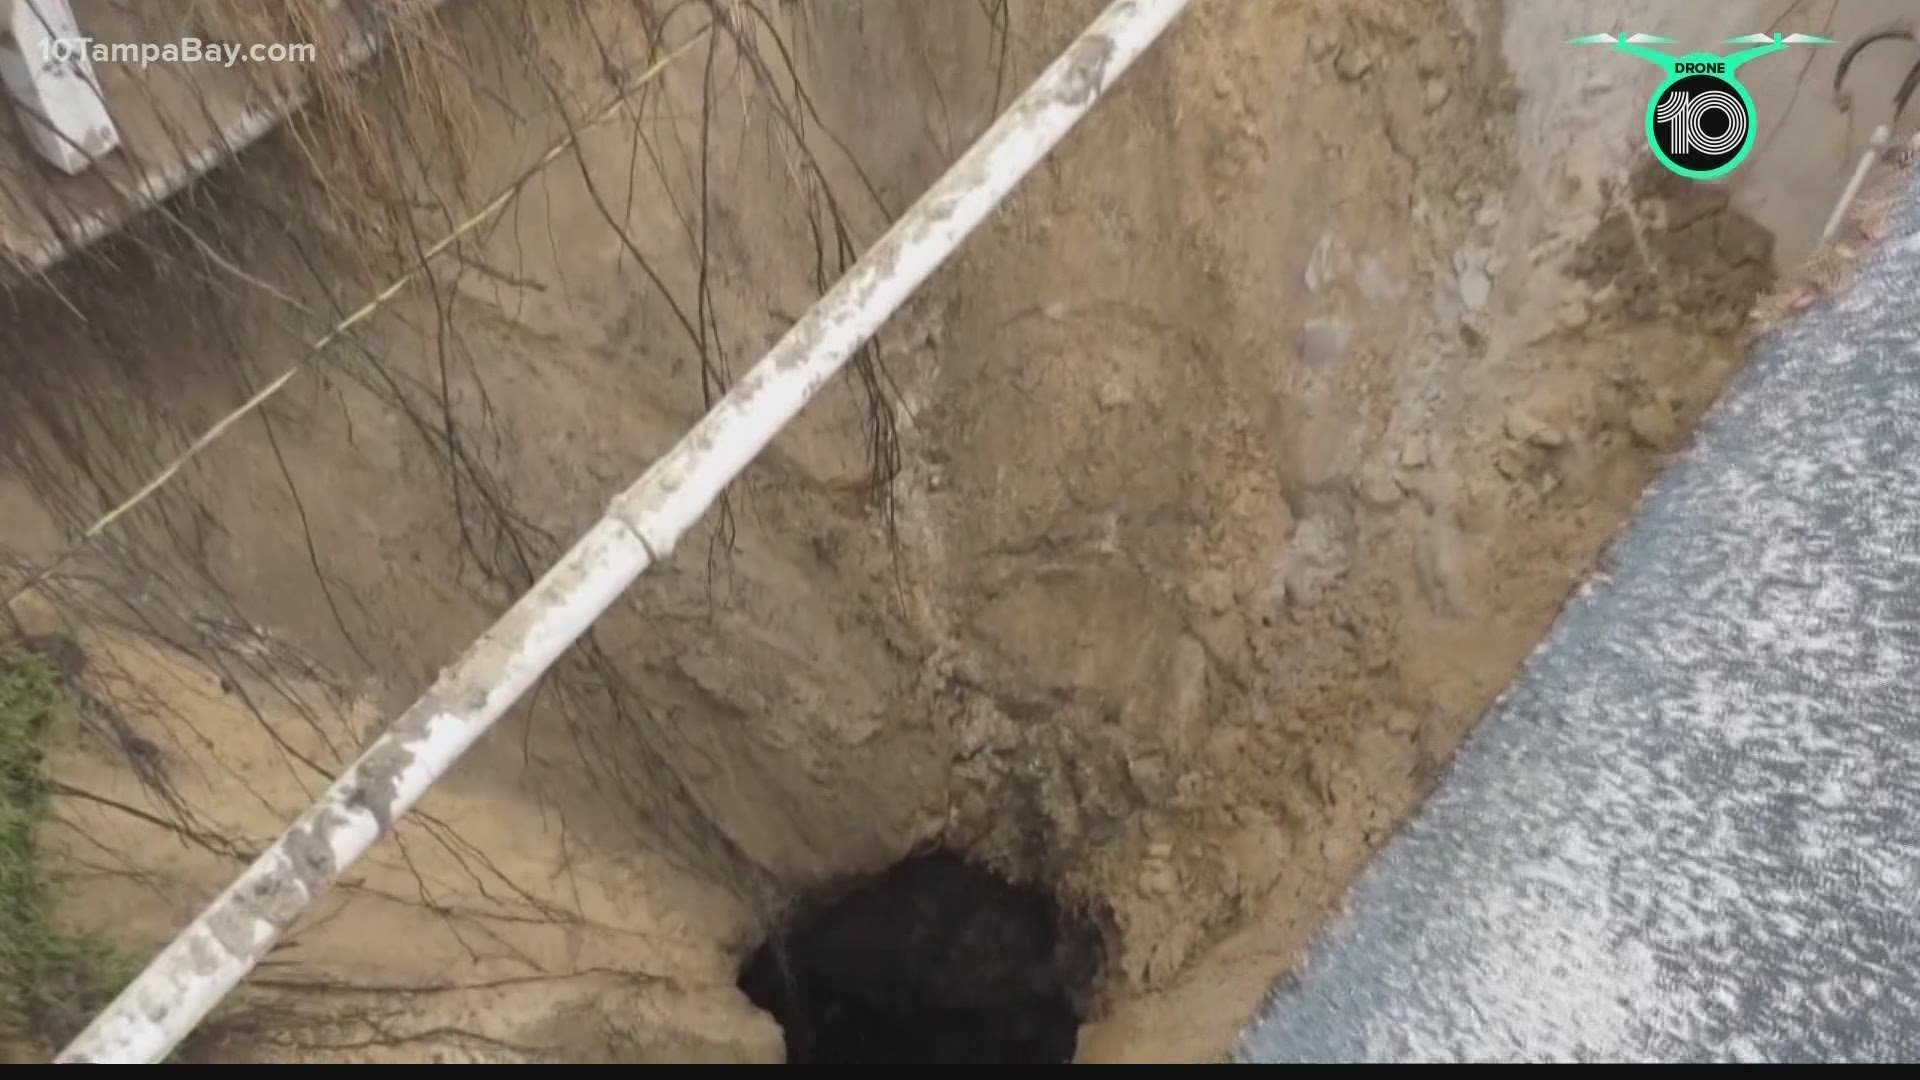 Emergency managers say the hole is now 55 feet deep.